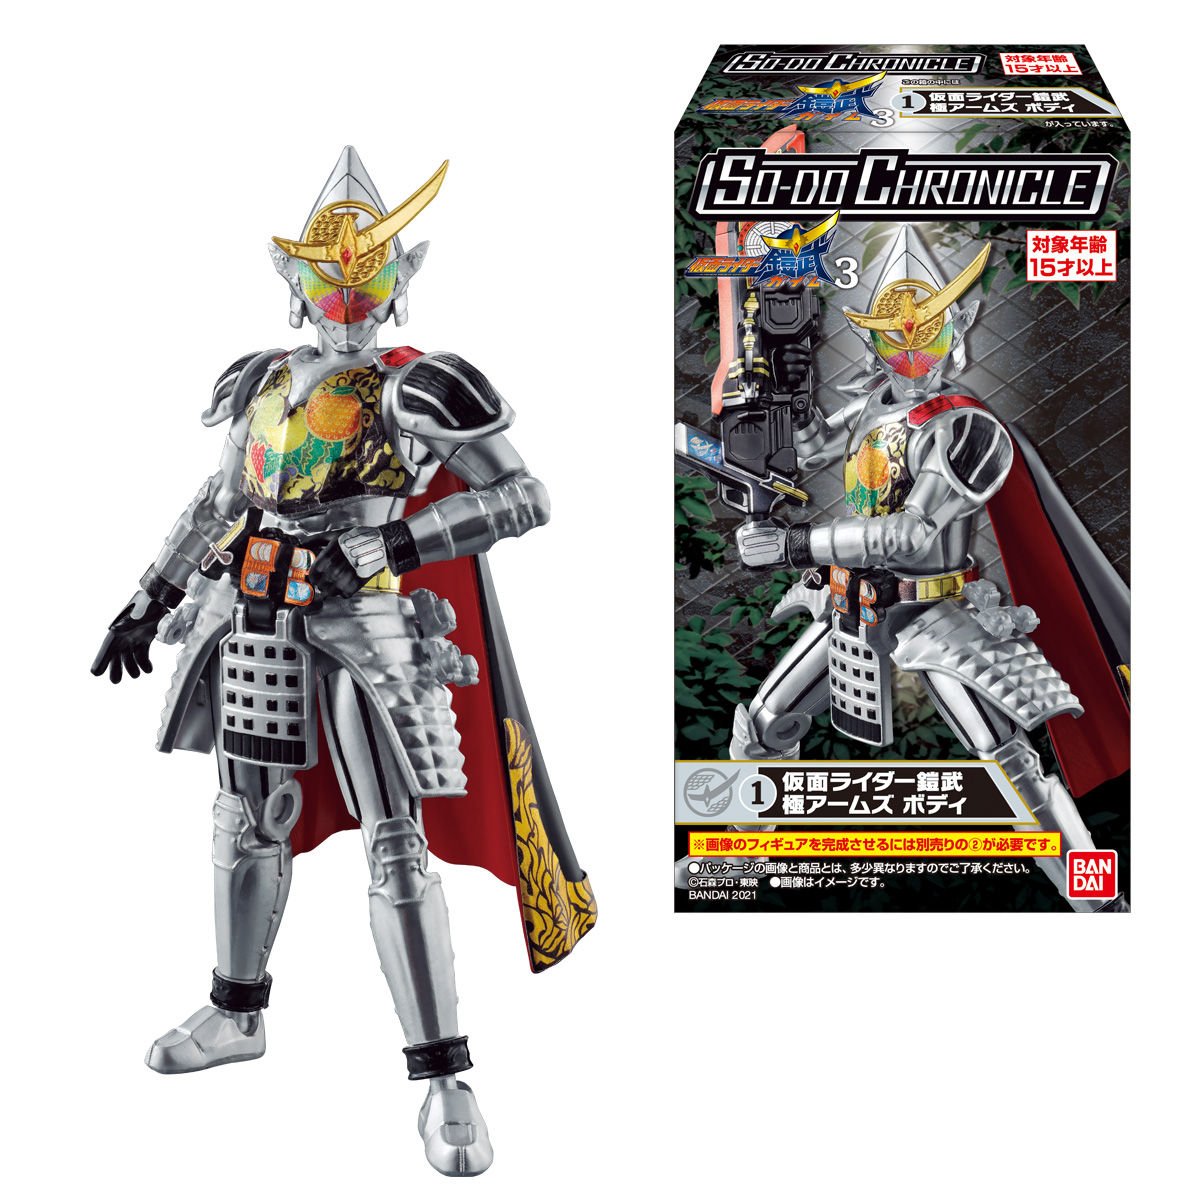 Lastly for the retail sets, we have SO-DO CHRONICLE Gaim 3! It's only fitting that the final retail set of Gaim figures would feature the final forms of the main riders as well as two MASSIVE accessory sets!